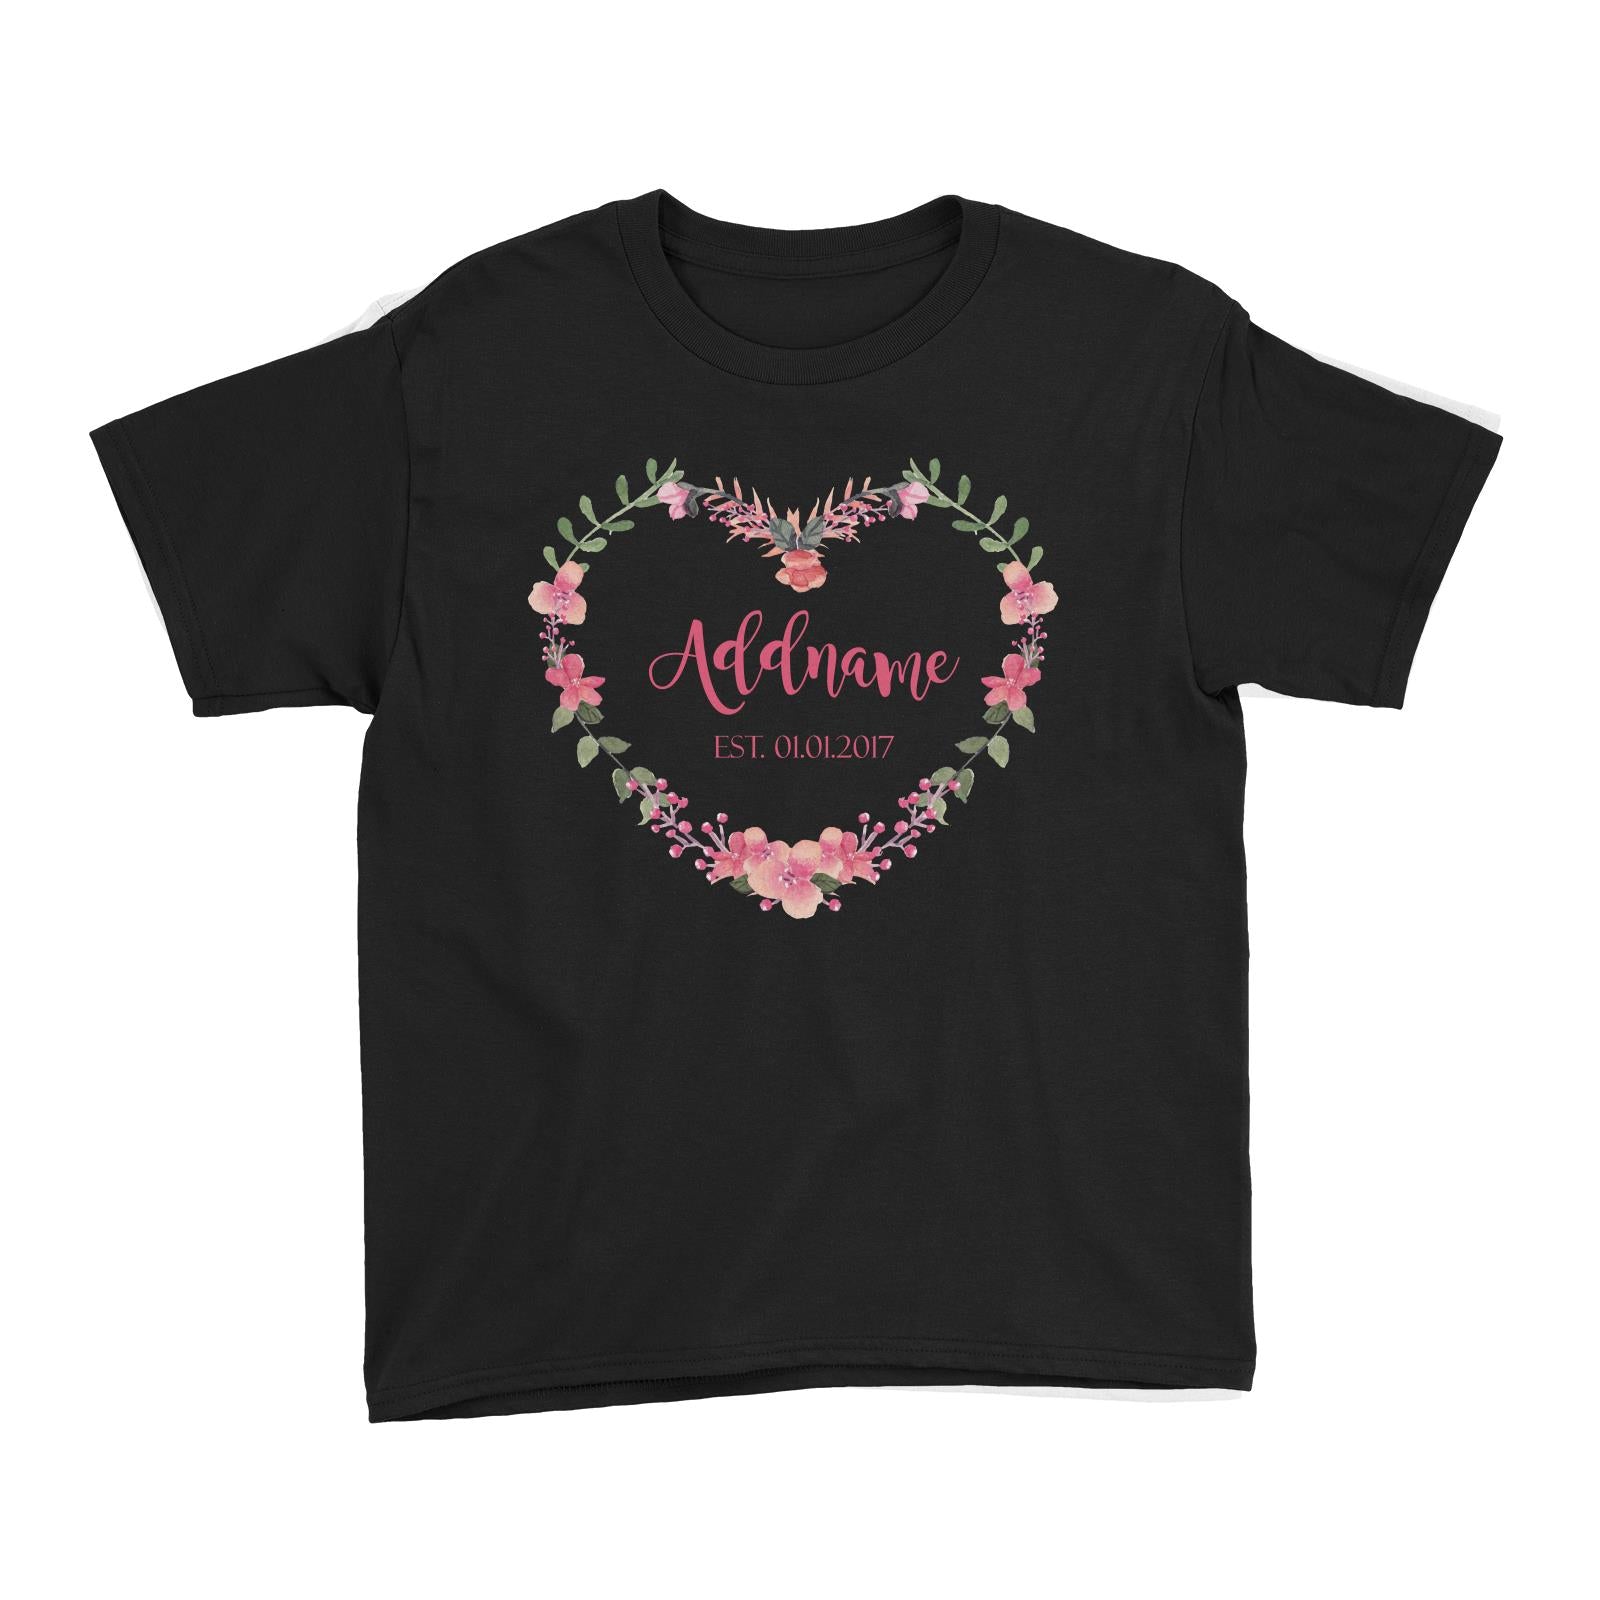 Add Name and Add Date in Pink Heart Shaped Flower Wreath Kid's T-Shirt